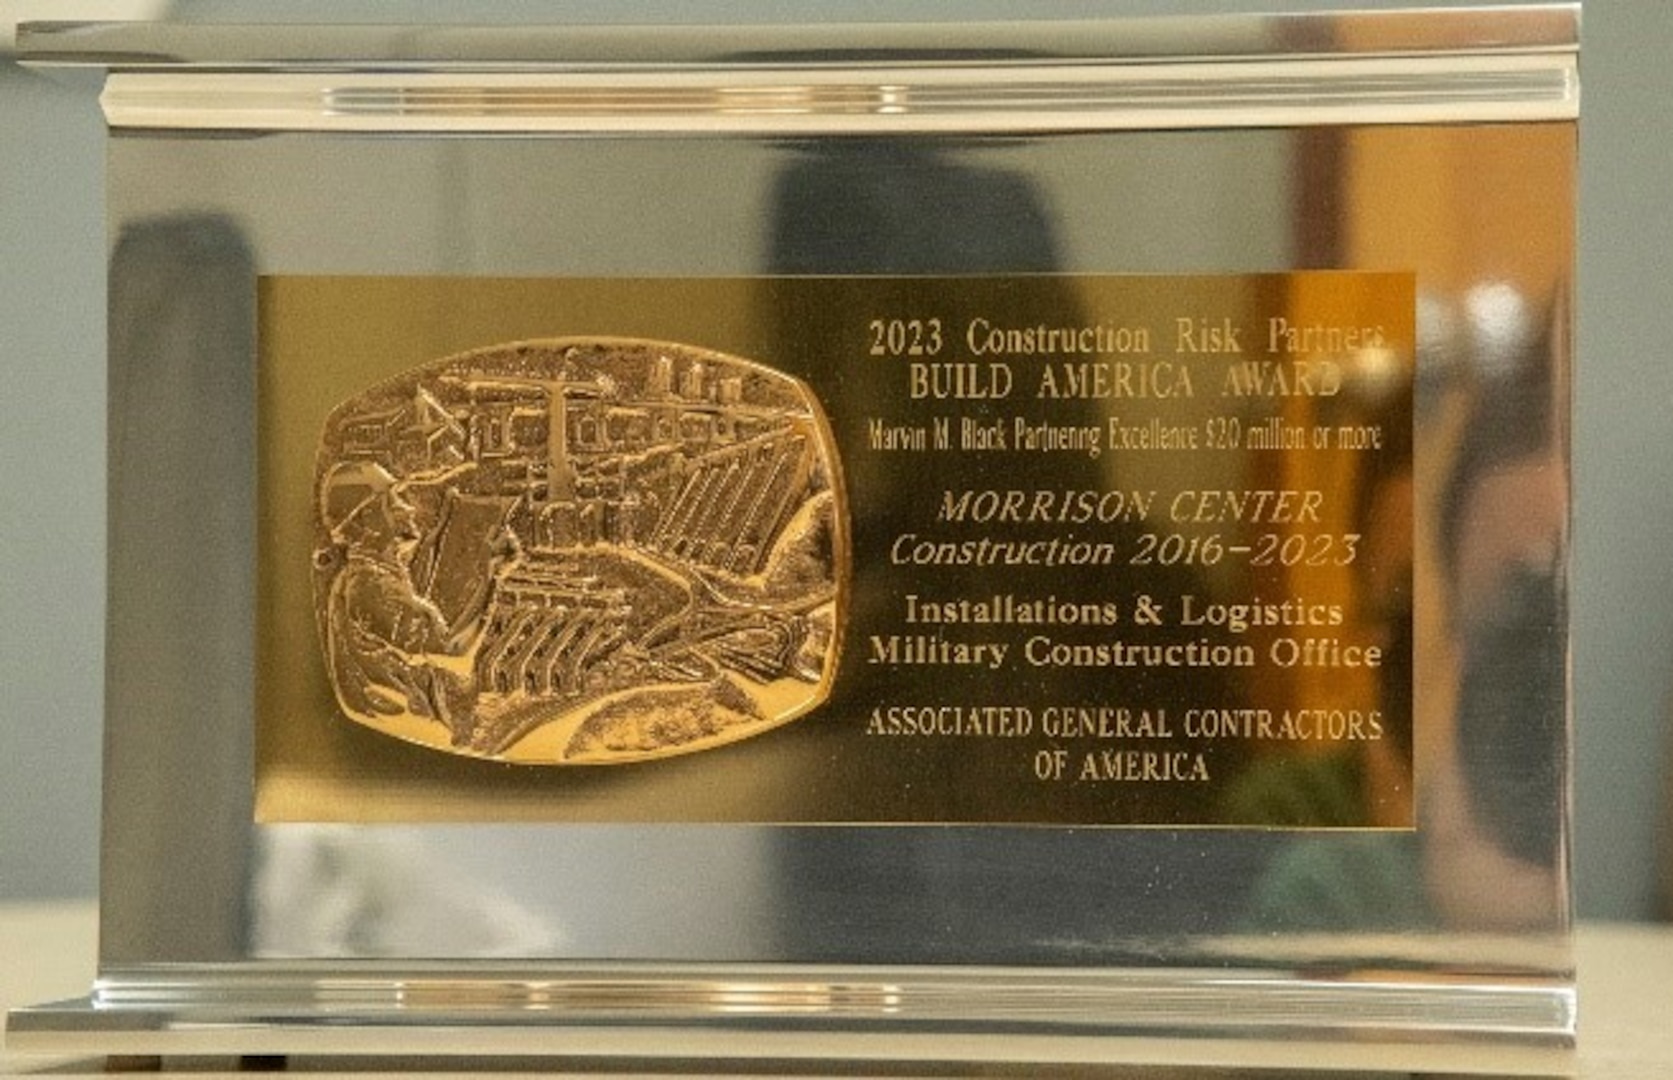 A closeup of the Marvin M Black award. The Morrison Center also received the Association of General Contractors Marvin M. Black Excellence in Partnering and Collaboration Award.